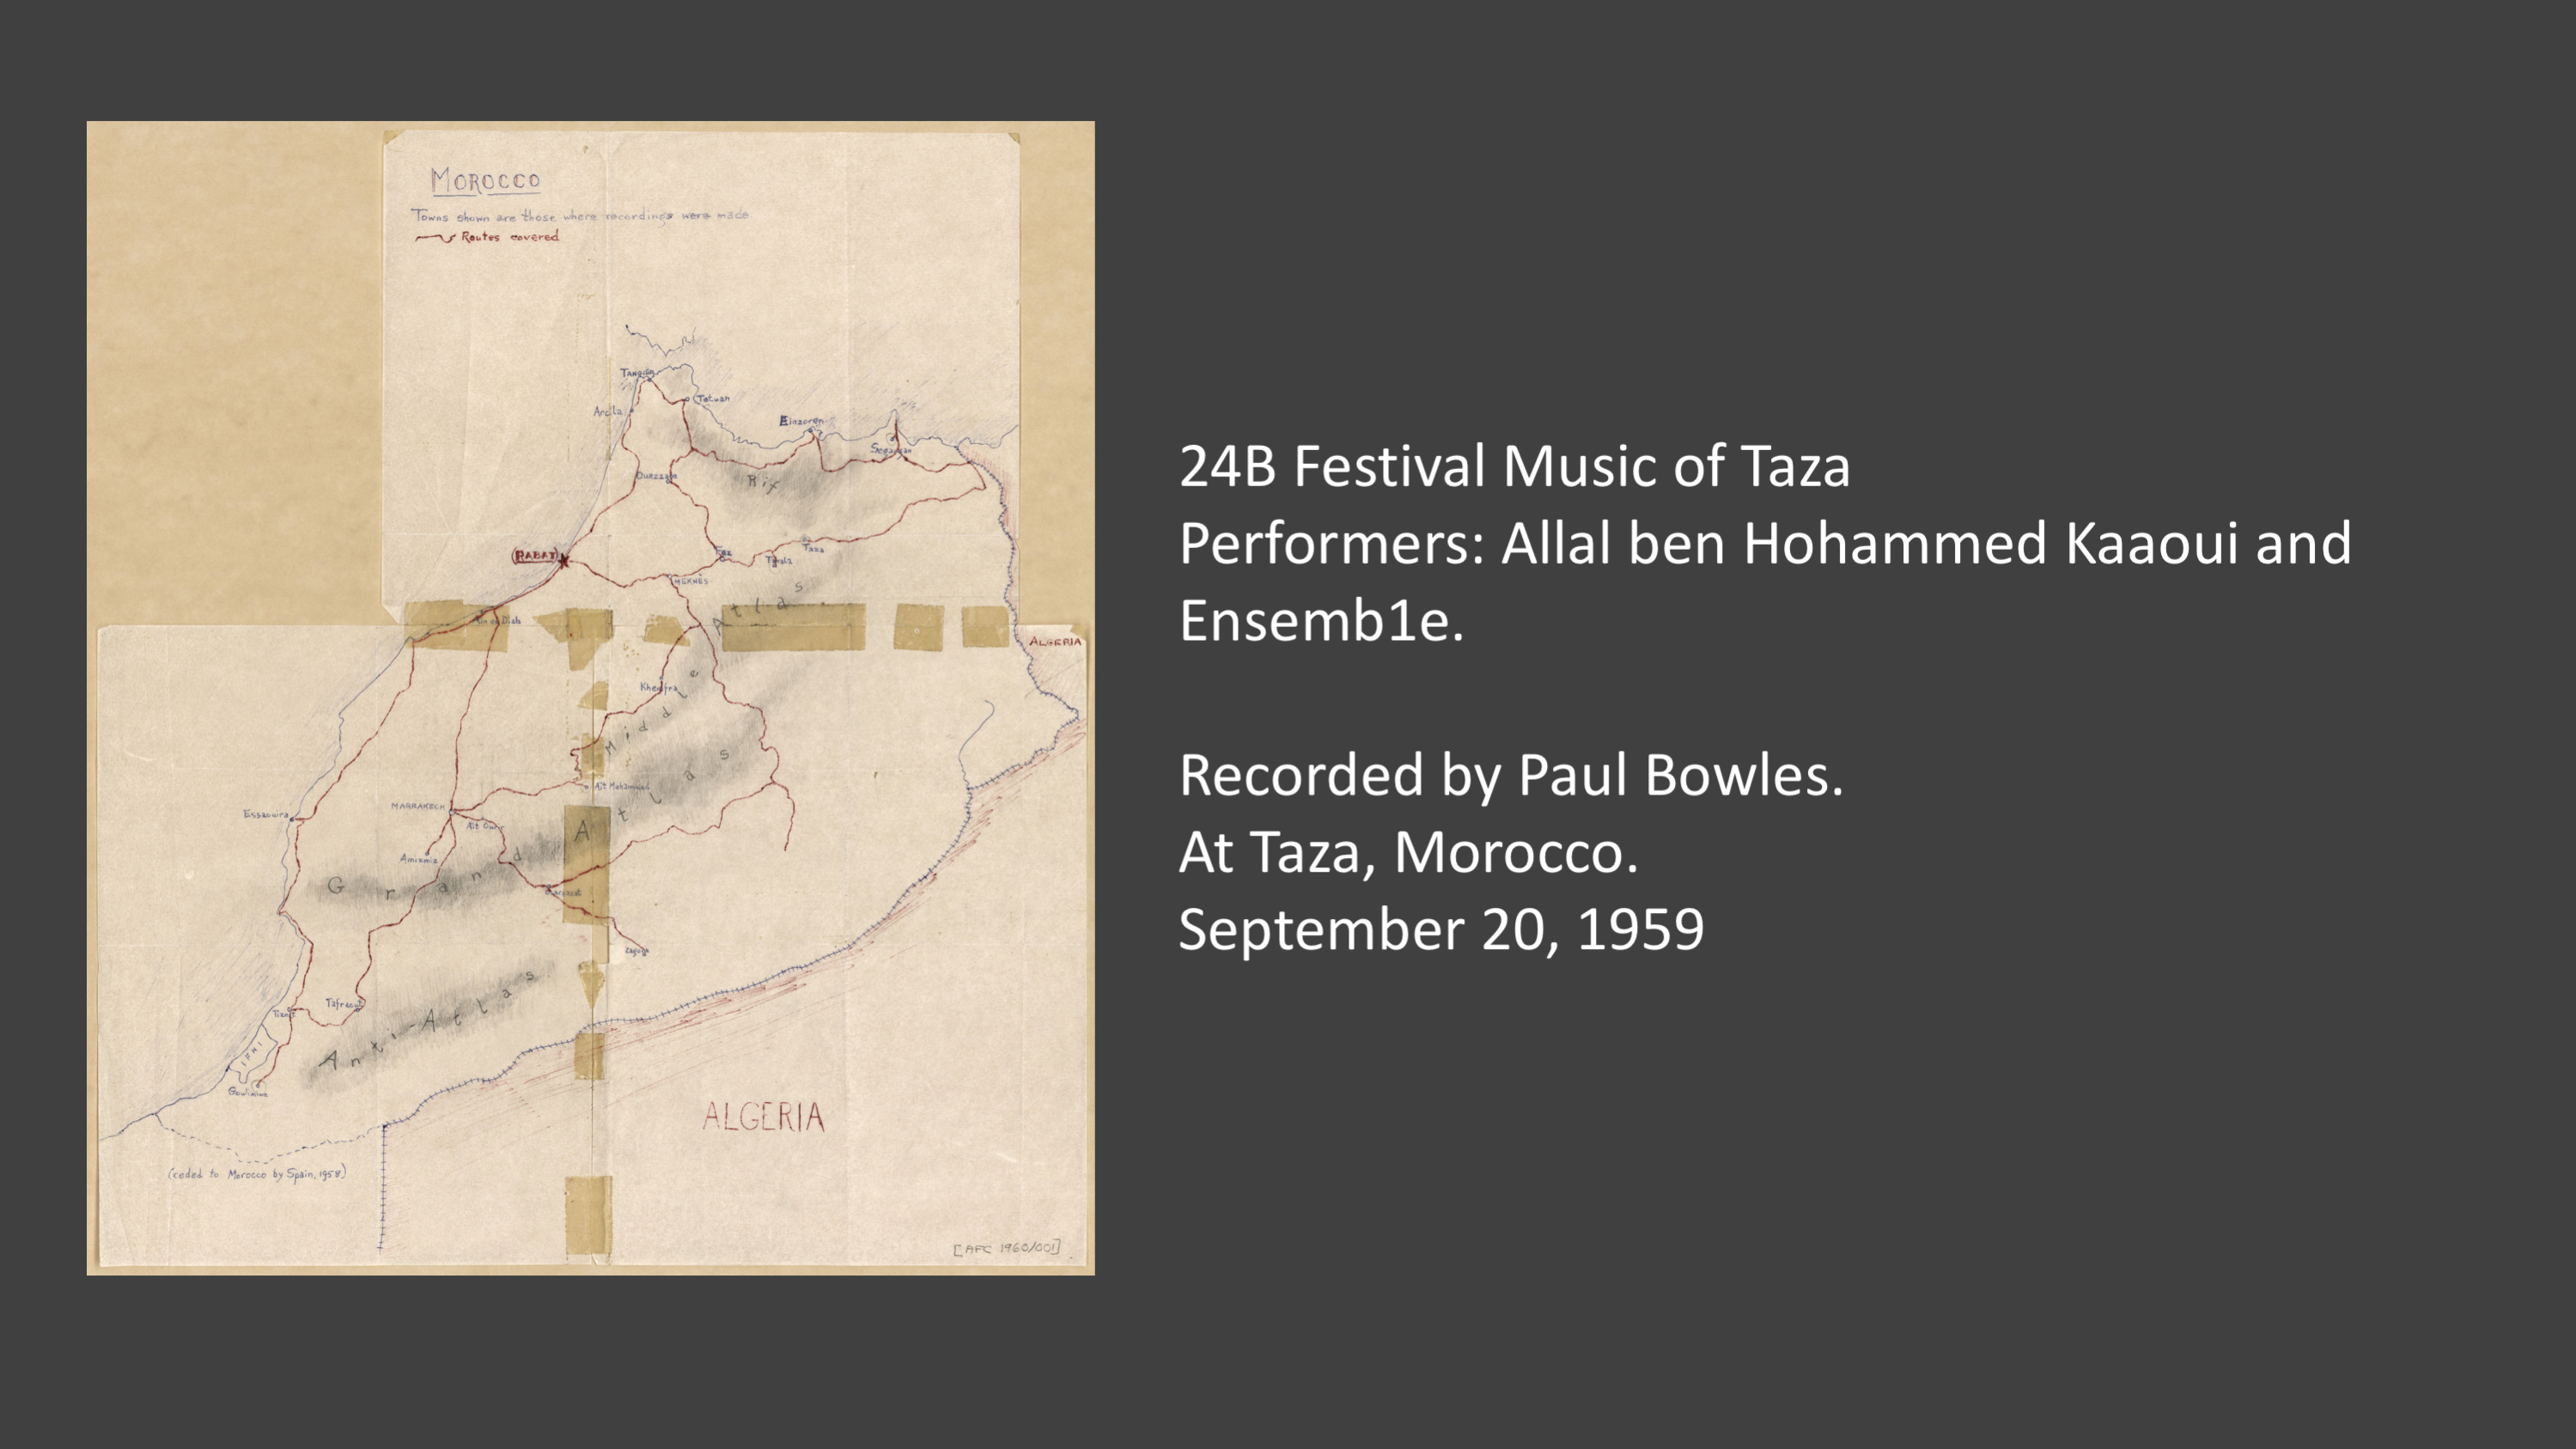 24B Festival Music of Taza
Performers: Allal ben Mohammed Kaaoui and Ensemble